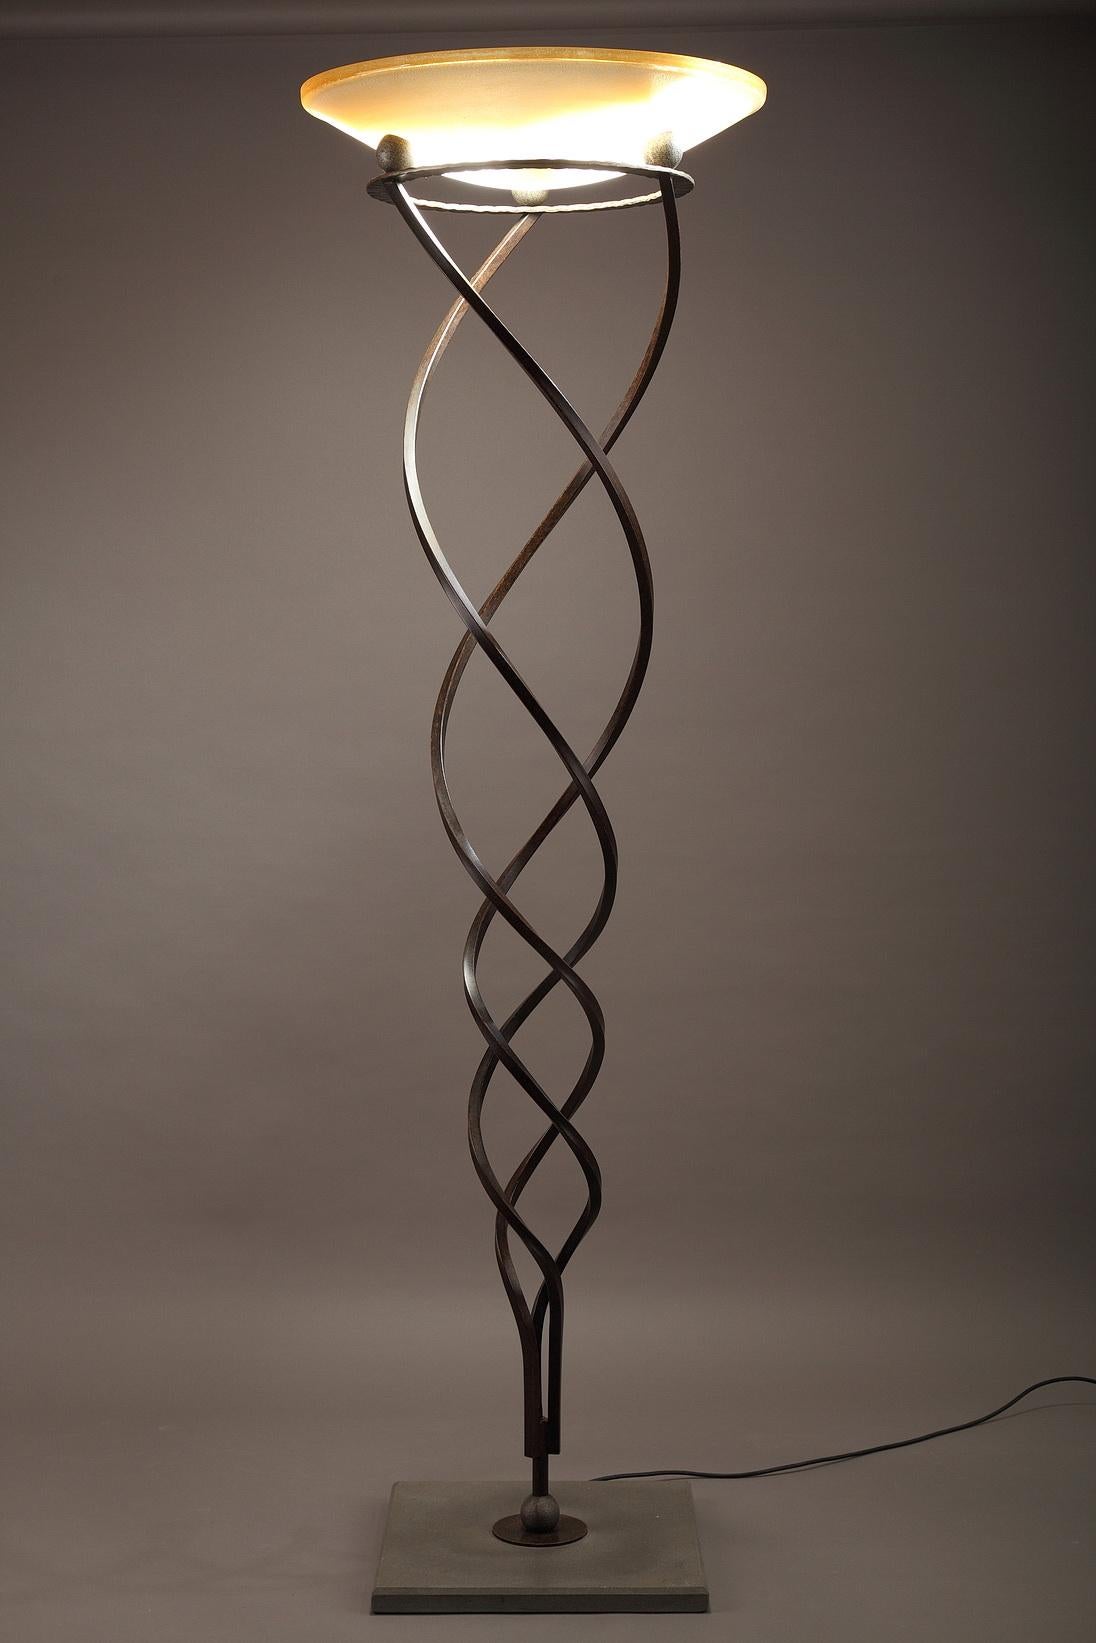 Murano Glass Antinea Floor Lamp by Jean-françois Crochet, Published by Terzani, 20th Century For Sale